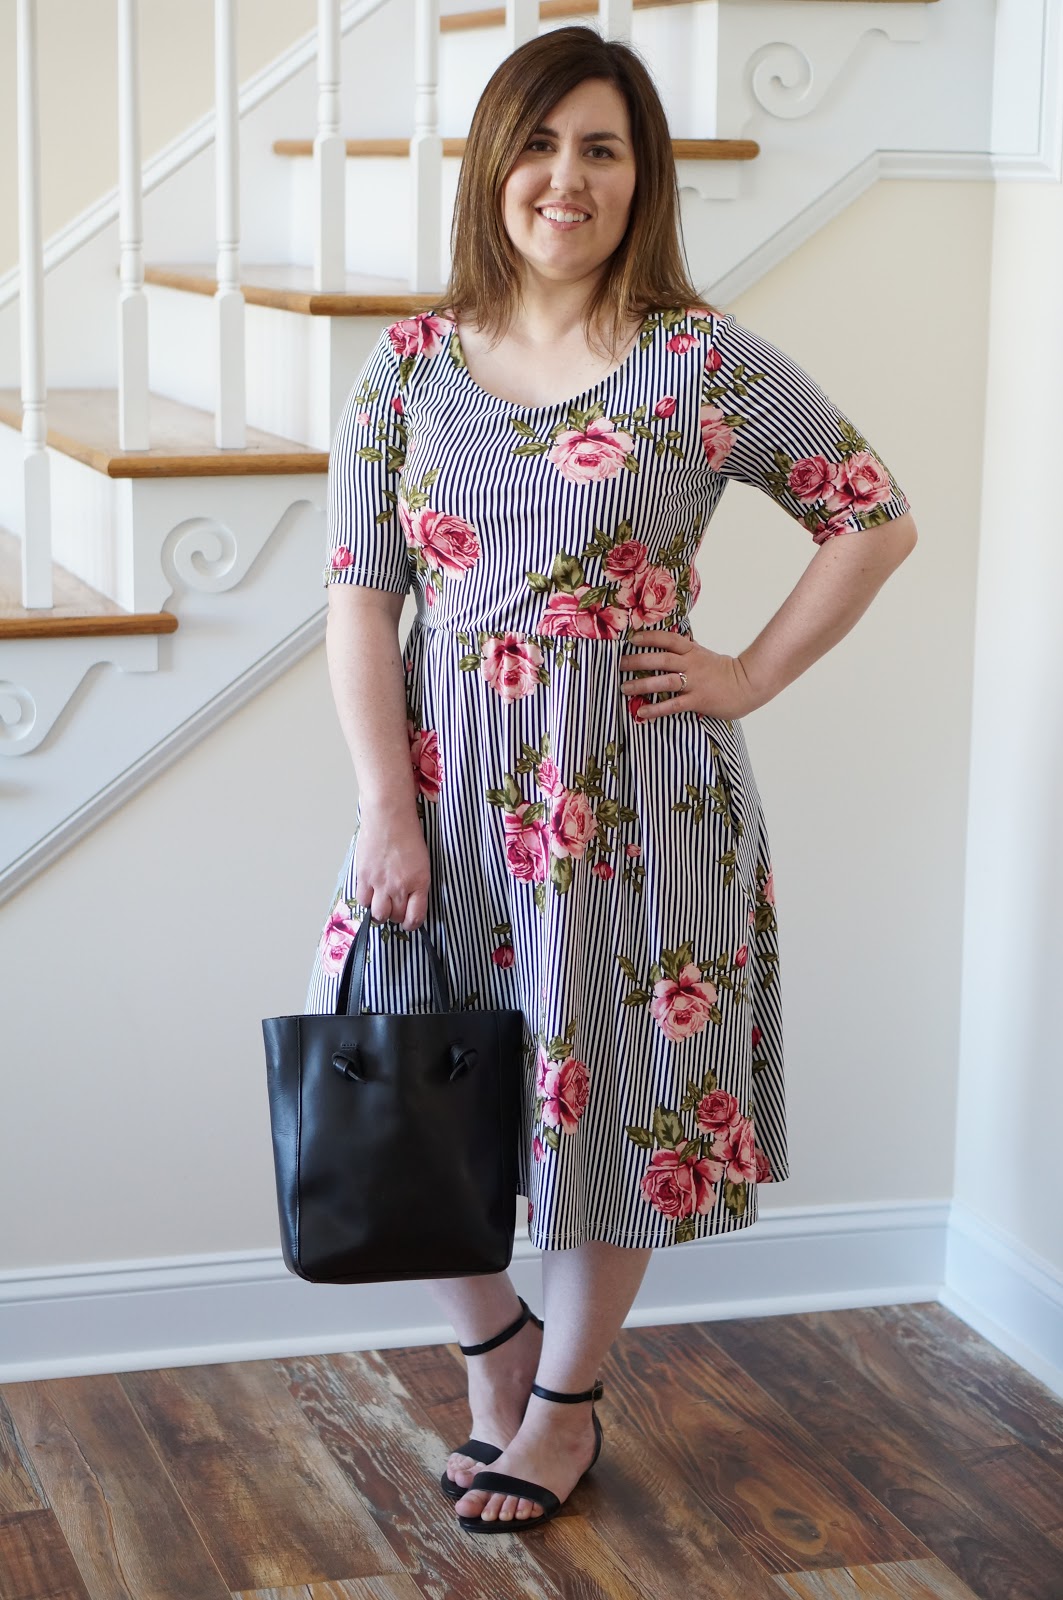 Popular North Carolina style blogger Rebecca Lately shares her favorite piece from The Flourish Market.  Click here to read more!